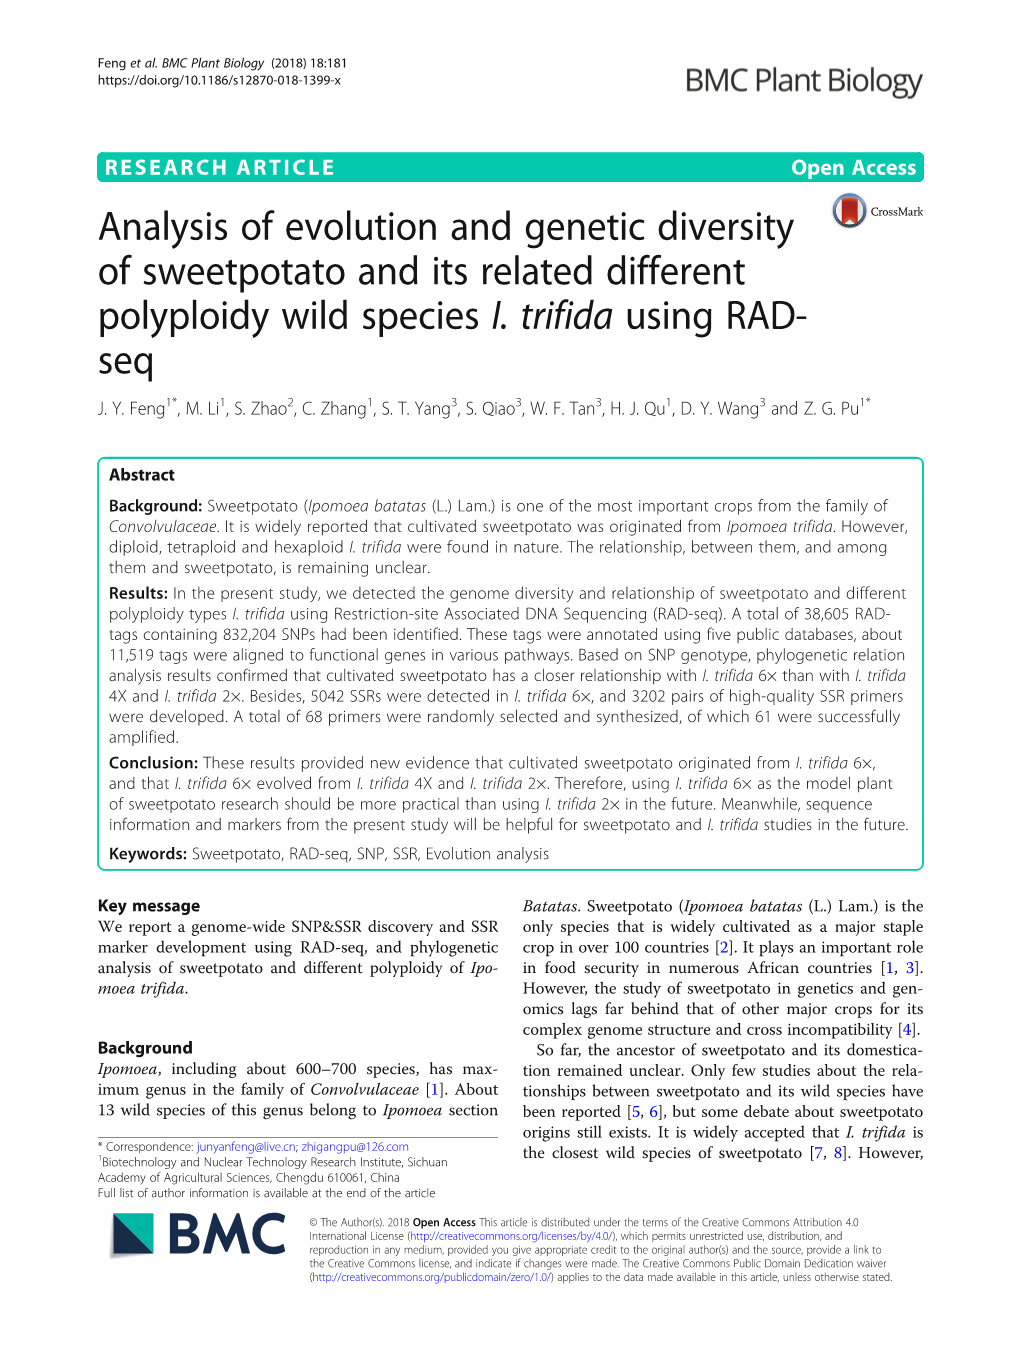 Analysis of Evolution and Genetic Diversity of Sweetpotato and Its Related Different Polyploidy Wild Species I